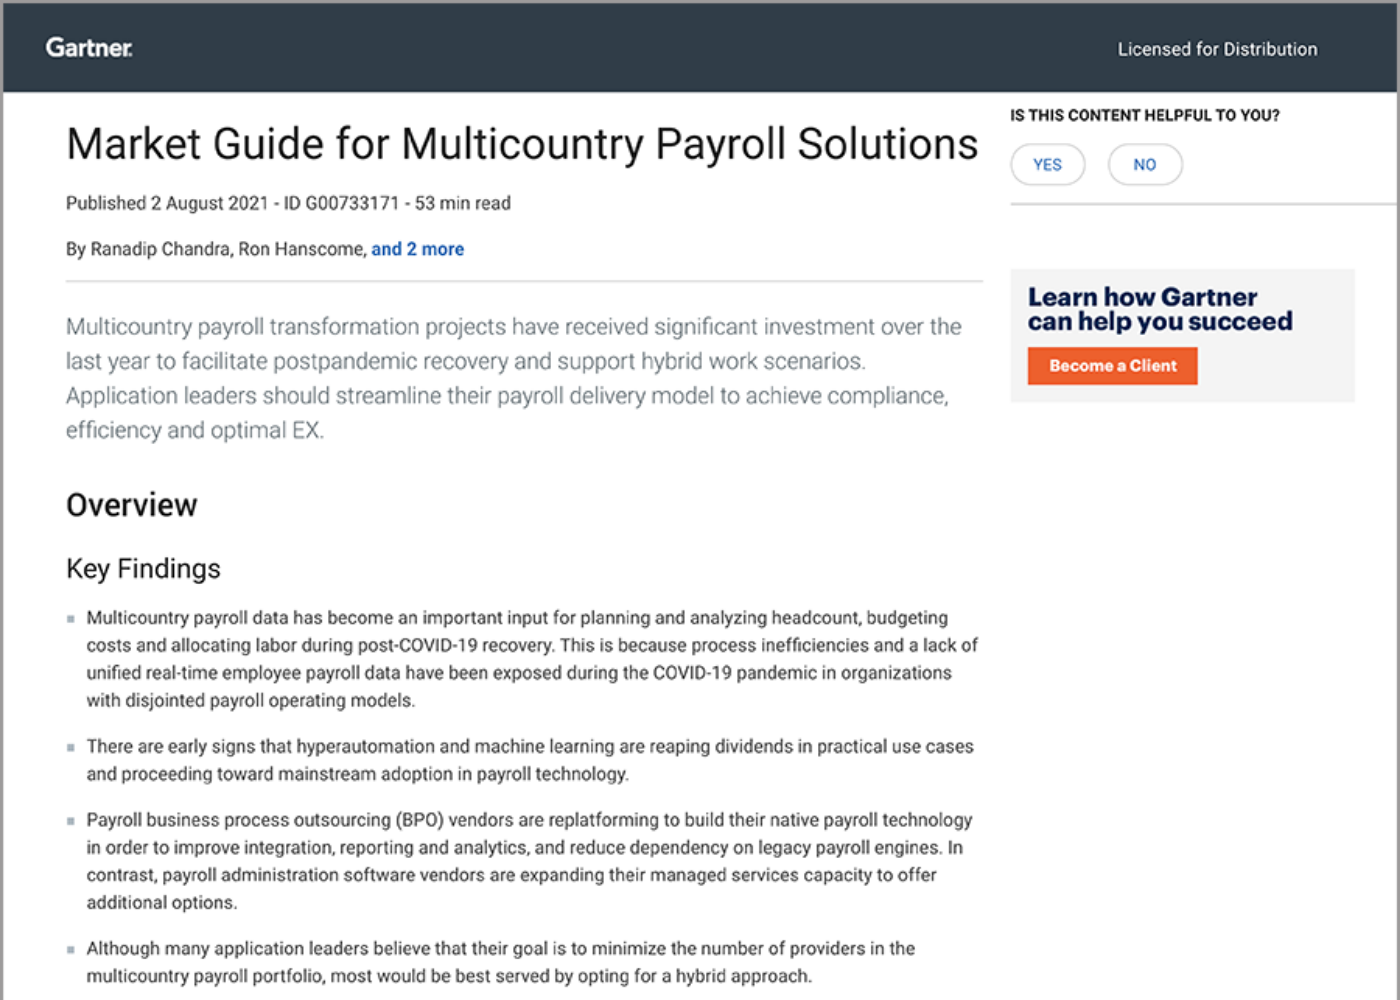 Market Guide for Multicountry Payroll Solutions